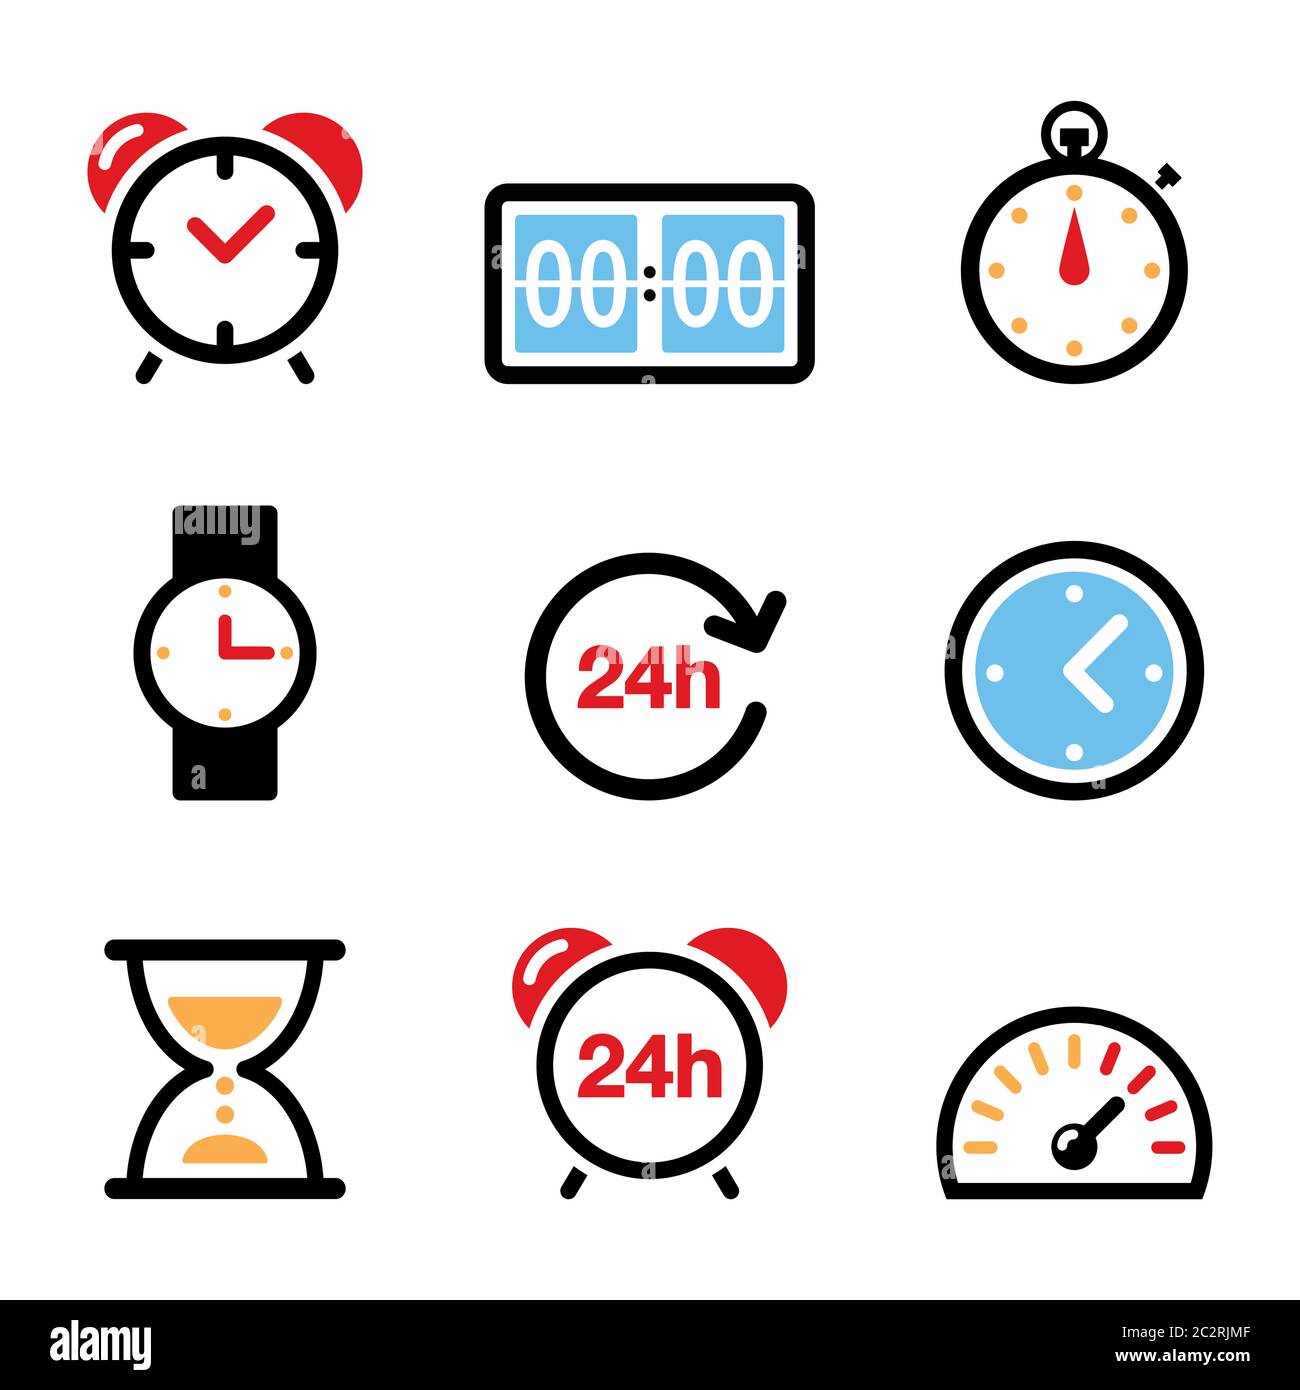 Time, clock vector color icons set - alarm clock, wrist watch, stopper, speed meter Stock Vector